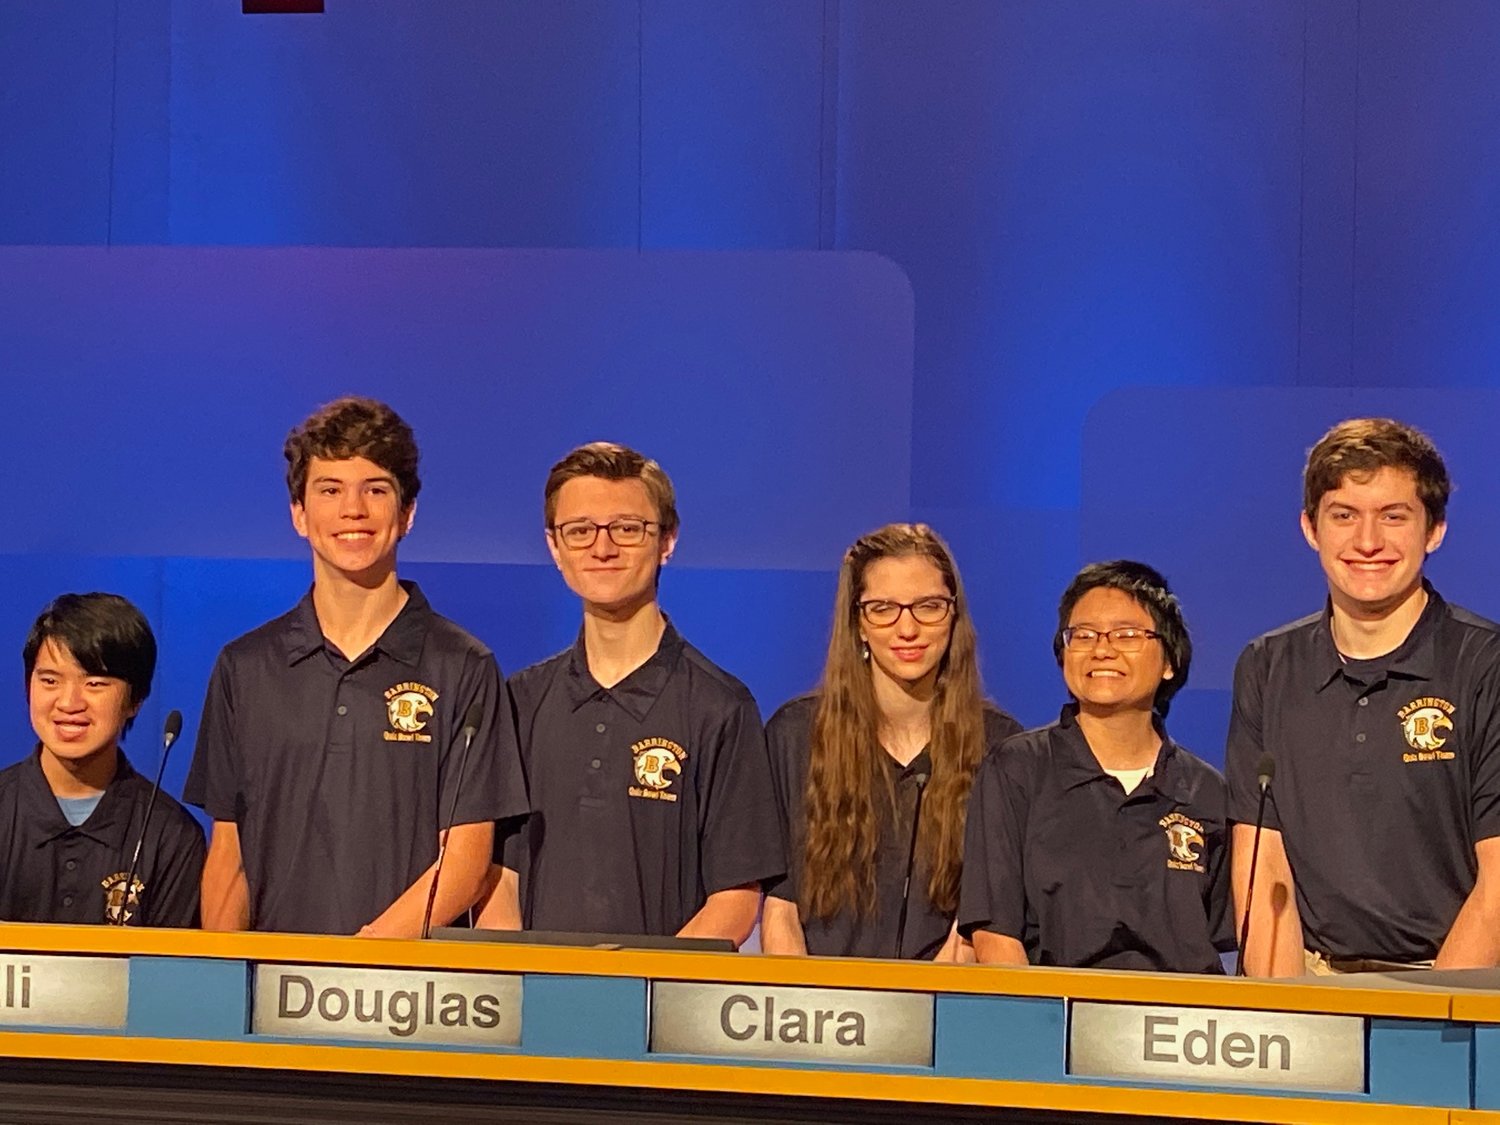 BHS Quiz Show competitors Benjamin Lamb, Eli Terrell, Douglas Meeker, Clara Kugler, Eden Lamb and Connor O'Neal (from left to right) pose for a team photo.